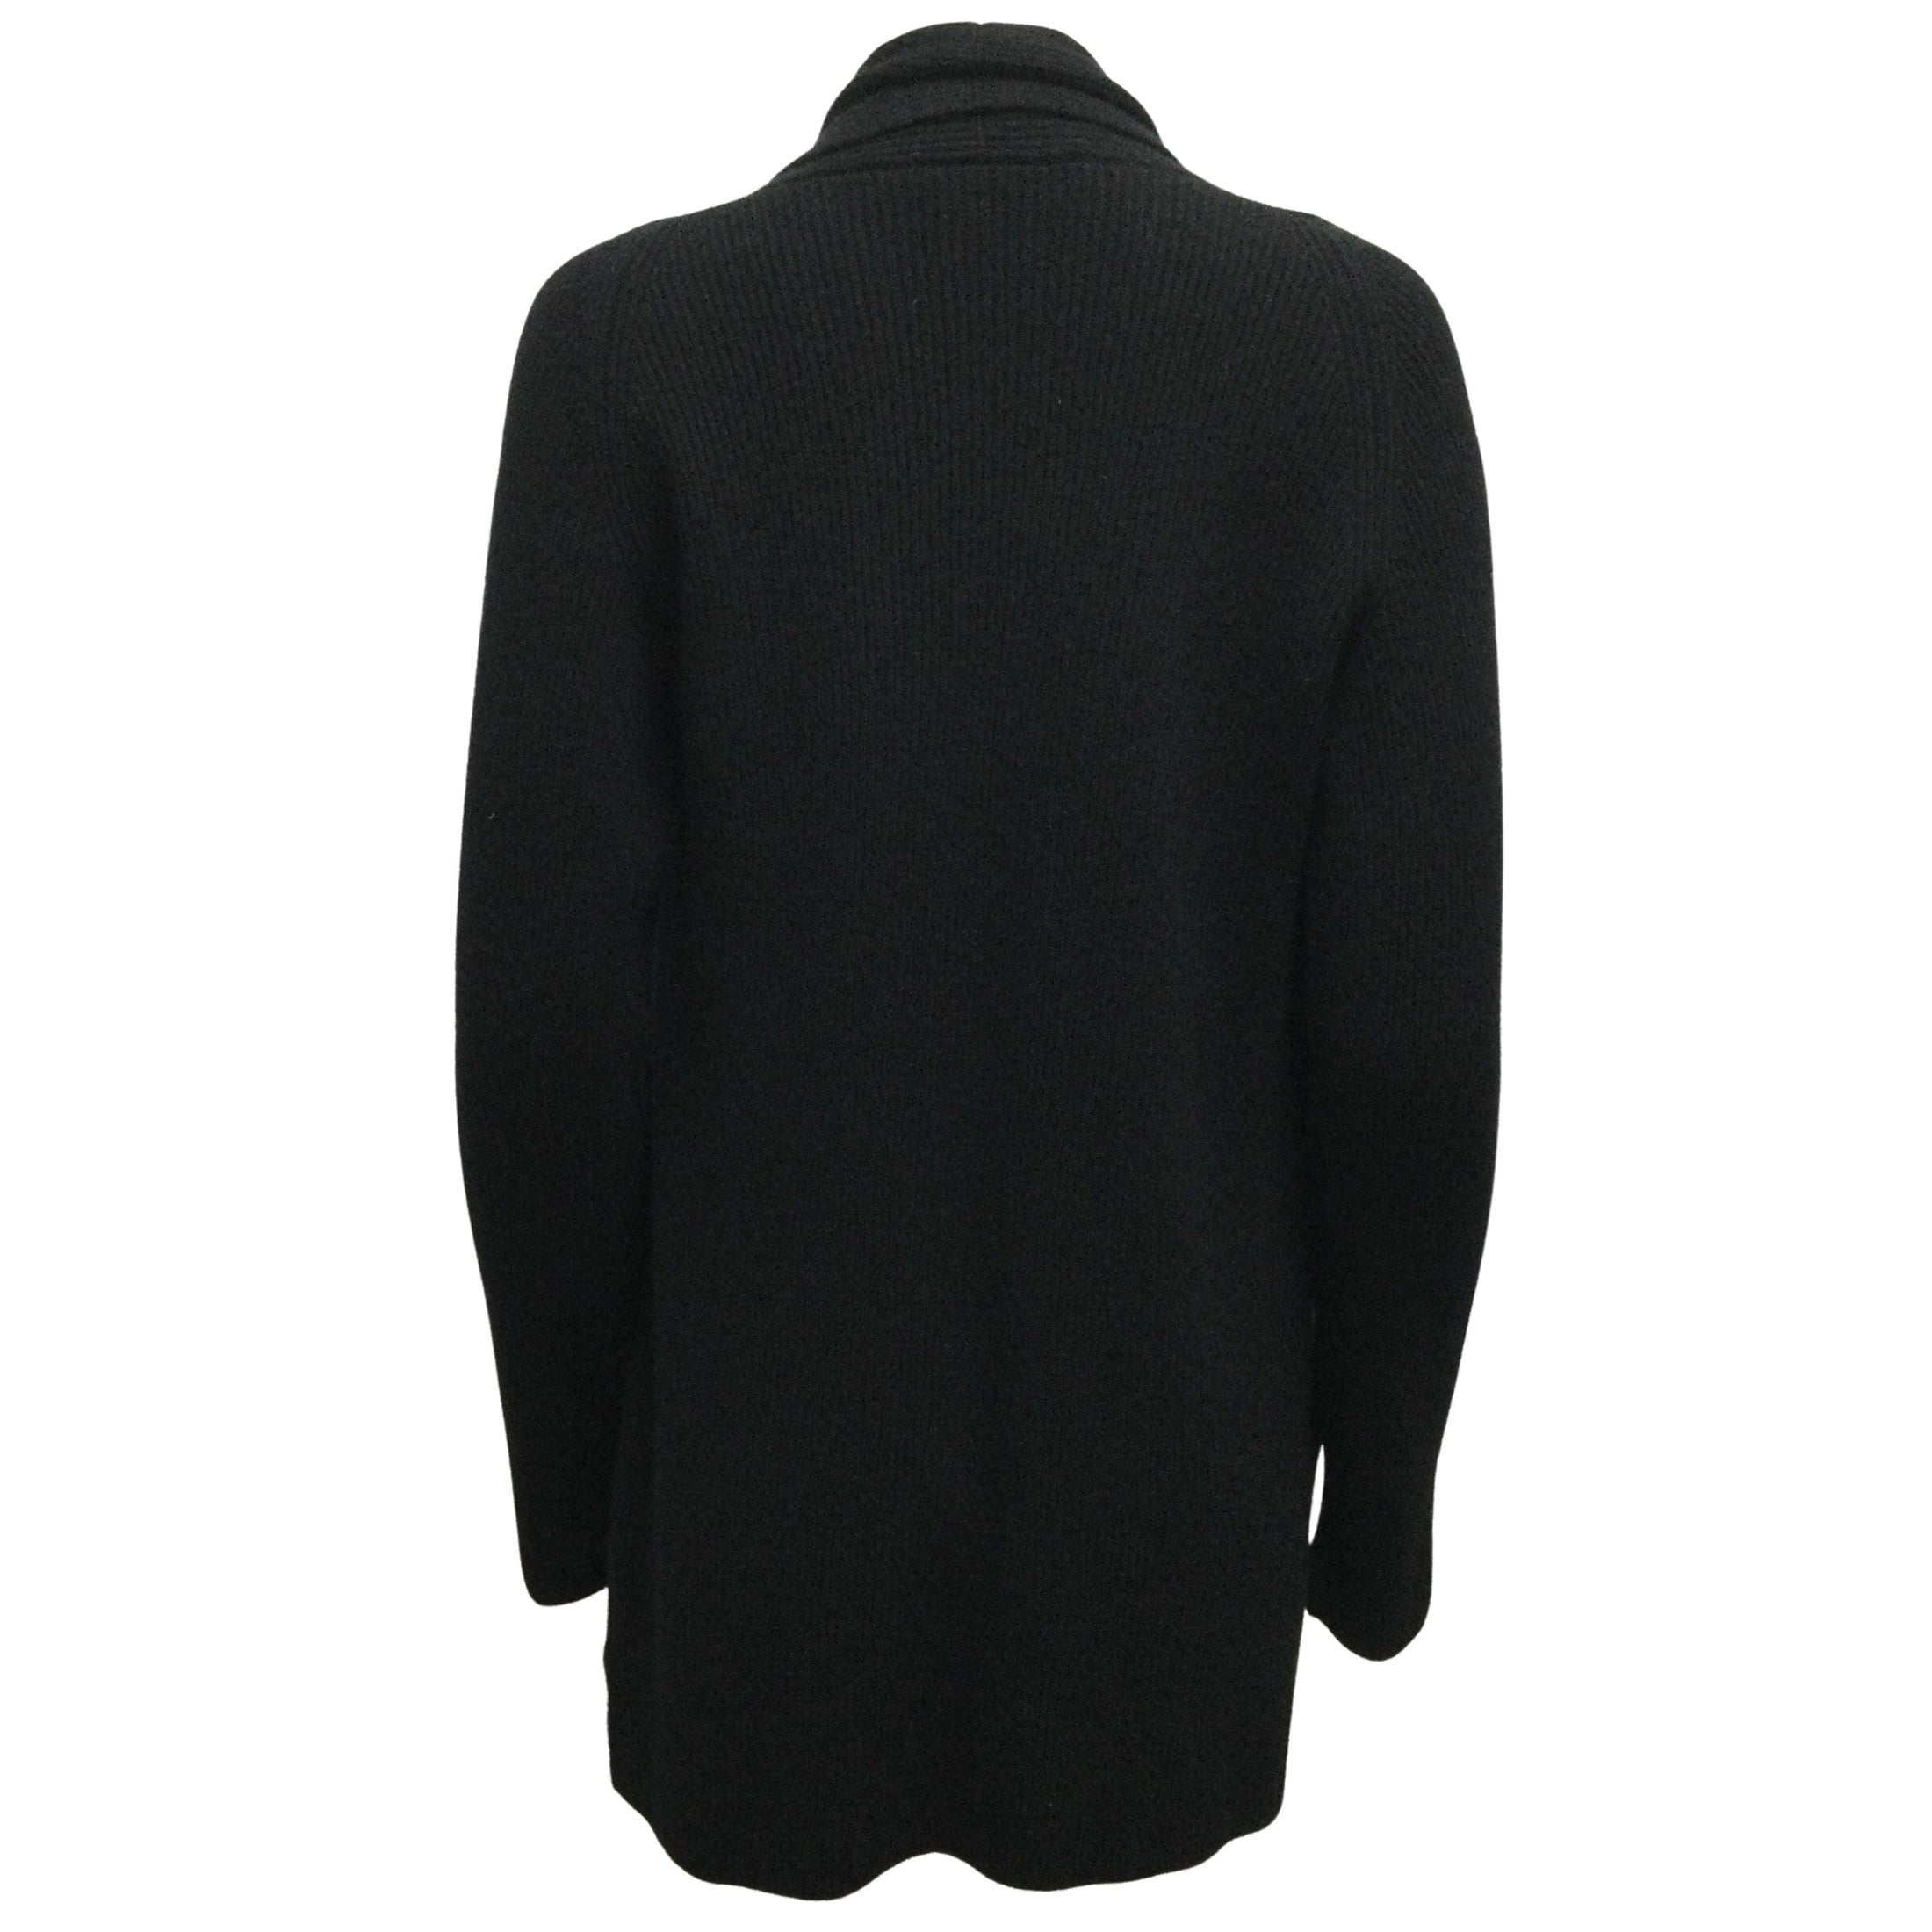 Misternic Long Sleeved Cashmere Ribbed Knit Black Sweater